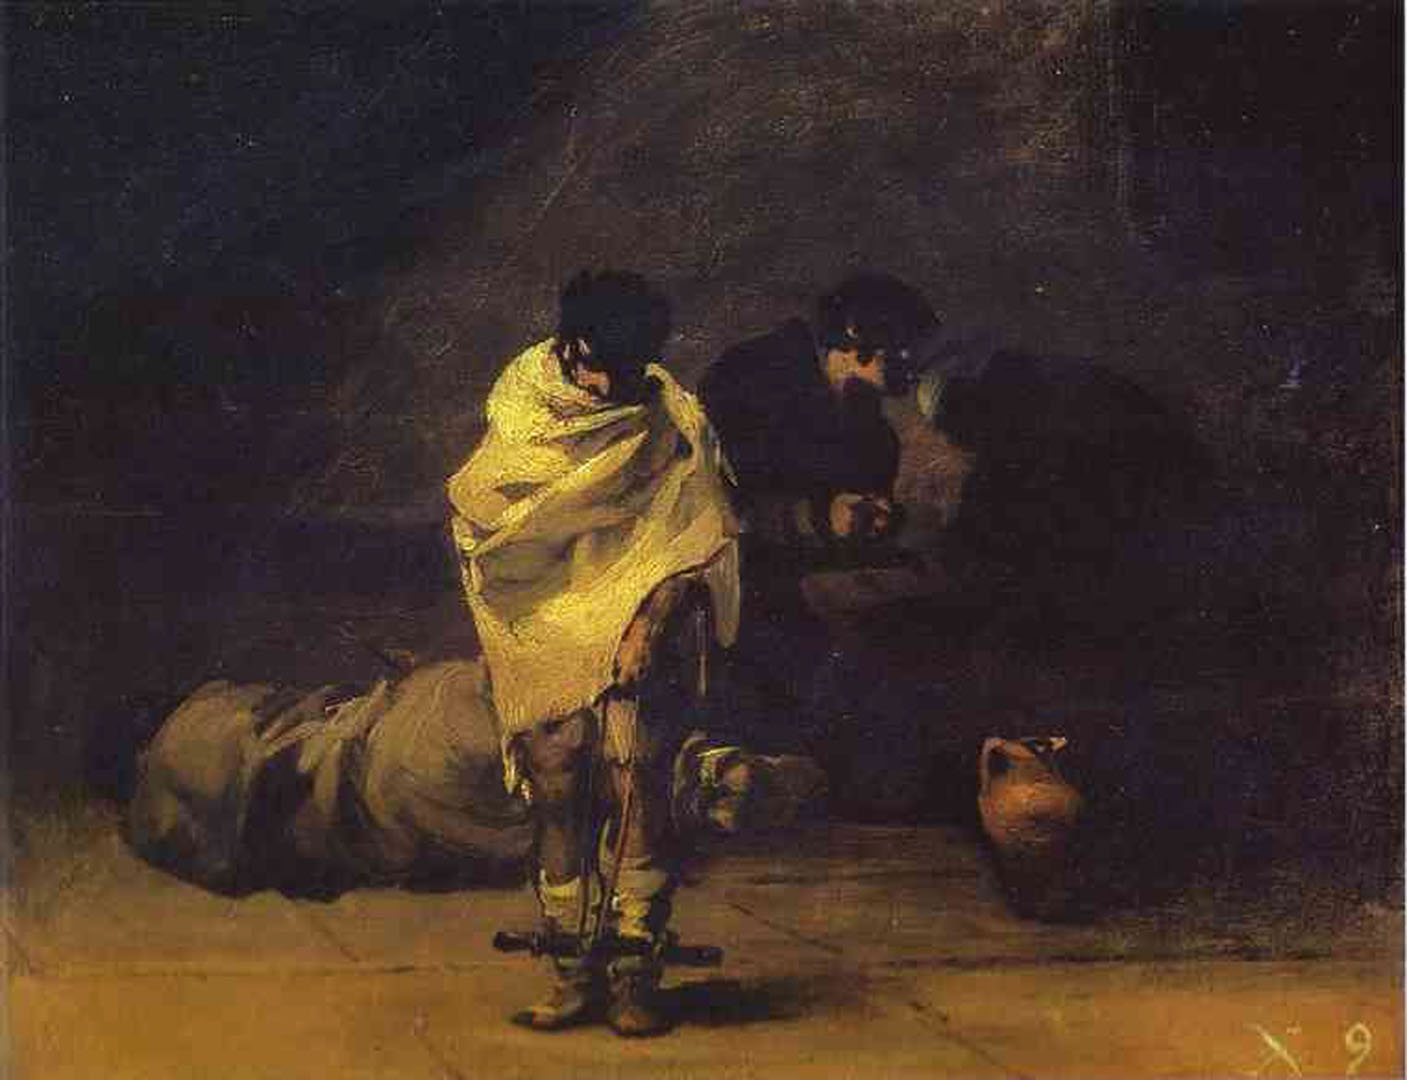 Francisco Goya Wallpapers and HD Backgrounds free download on PicGaGa.